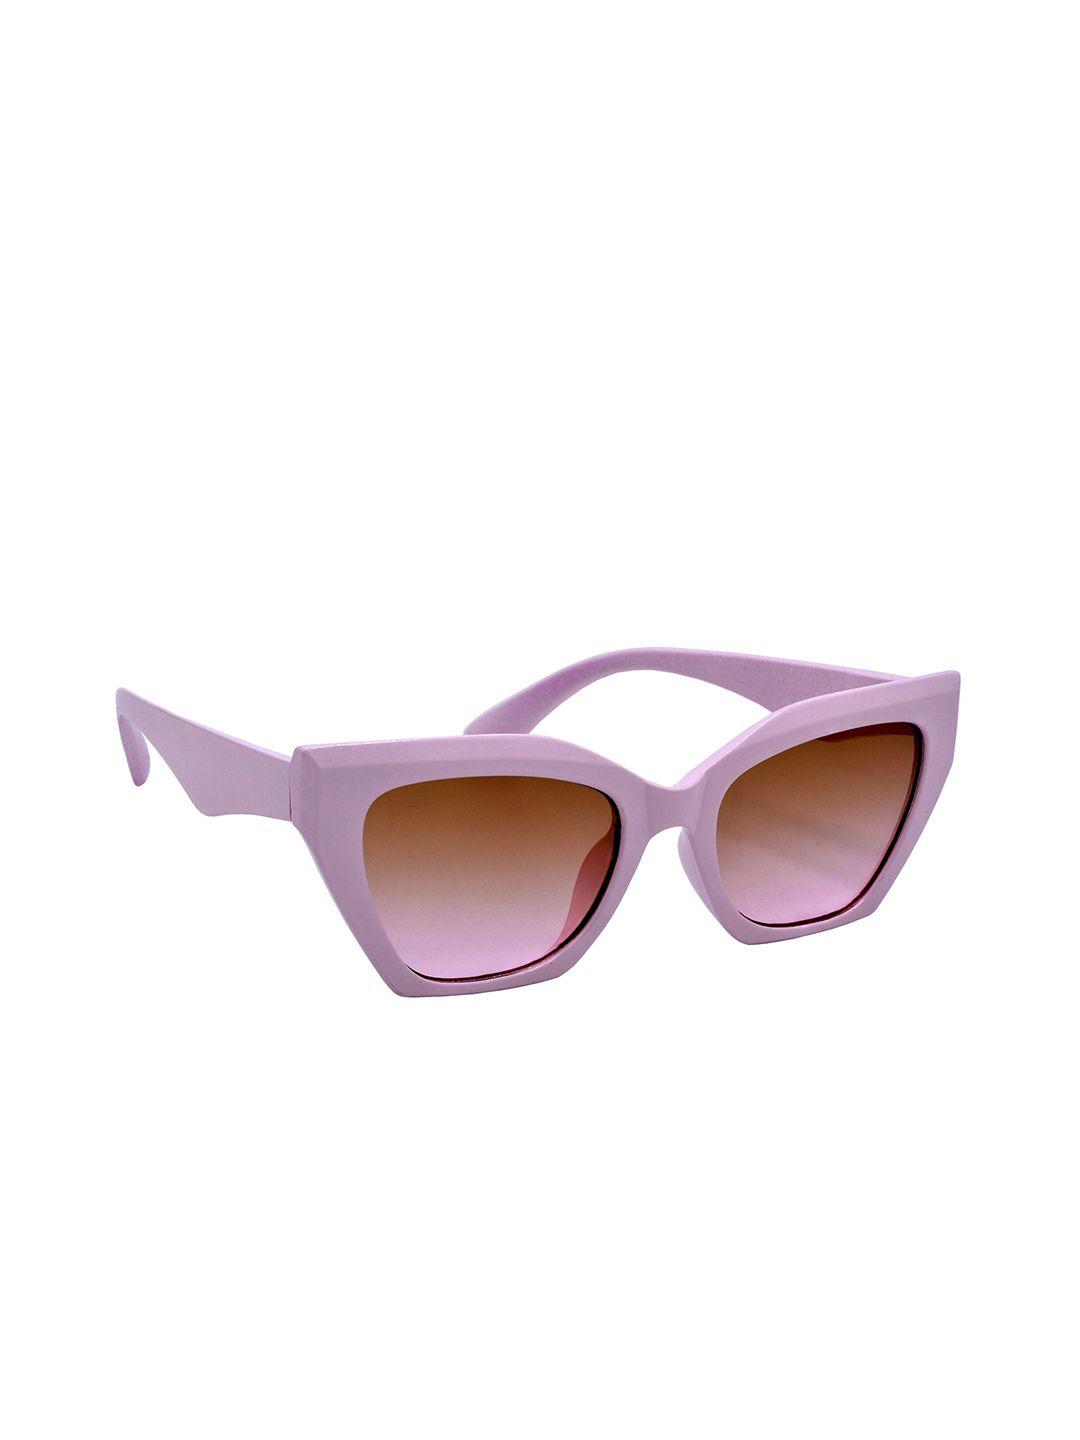 hrinkar women cateye sunglasses with uv protected lens hrs589-pch-bwn